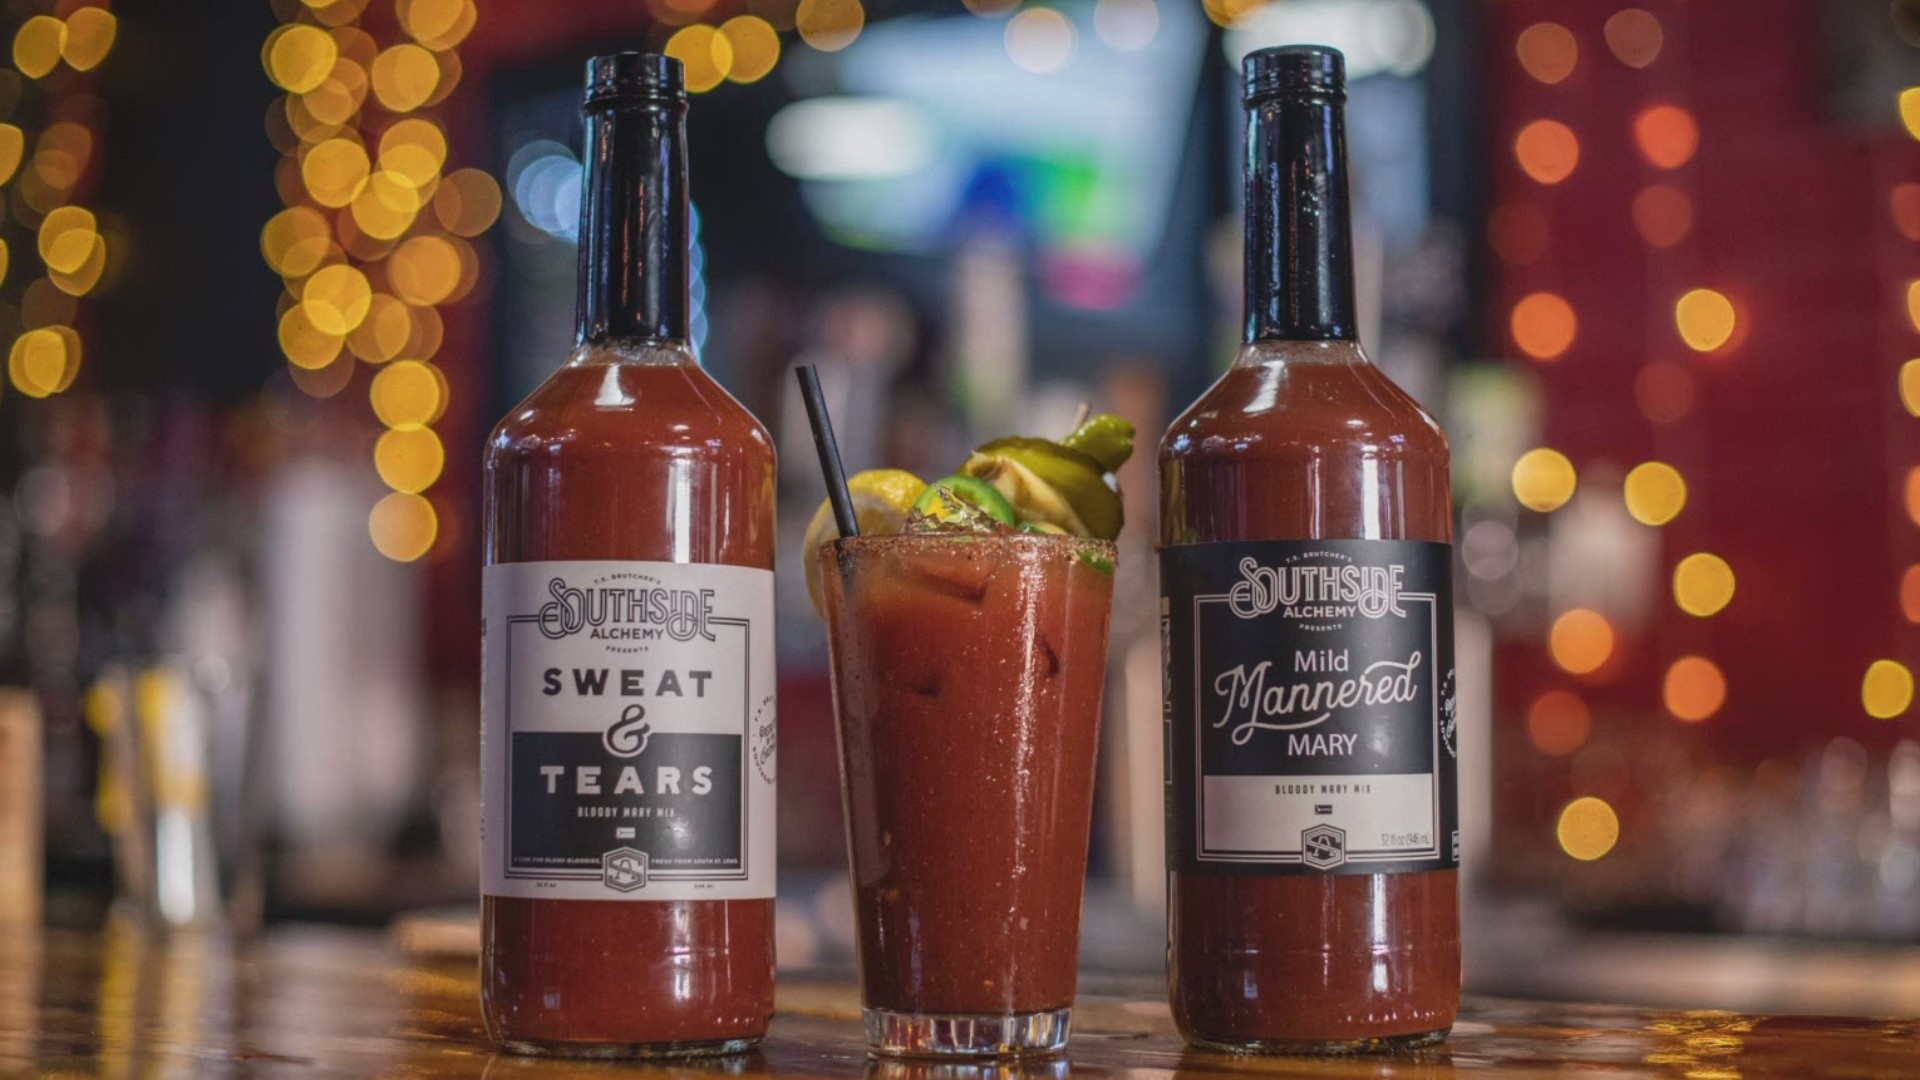 The business markets itself as St. Louis’ option for a Big, Bold, Low-Sodium Bloody Mary Mix.